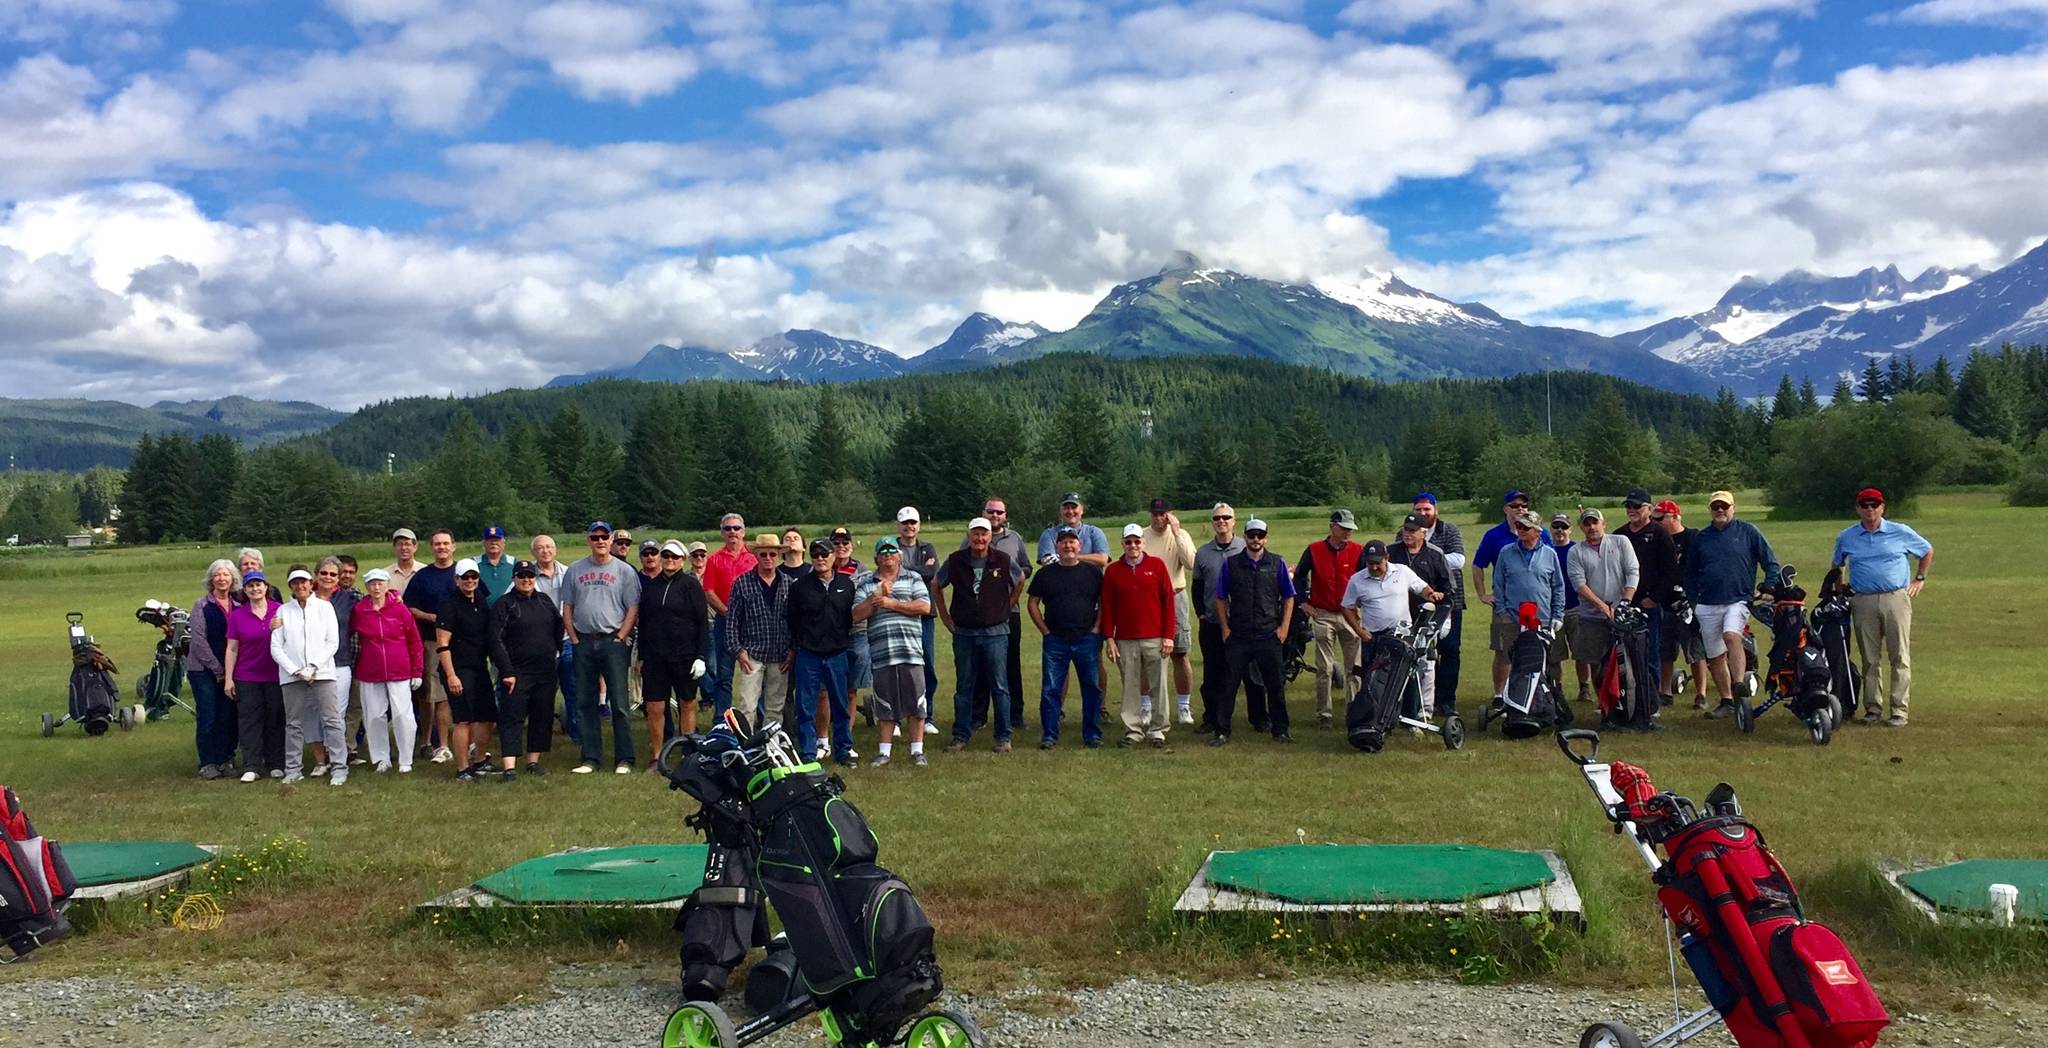 The Juneau Golf Club hosted the 2018 Scramble Tournament on Saturday at the Mendenhall Golf Course. A total of 15 teams of three competed in four different divisions (flights). The King division, which featured teams with the lowest handicapped players — a golf term for a player’s average score in relation to par — went to Two Birdies and a Shark (Bob Storer, Greg Winegar, Dan Bruce). The Pink division, which featured all women players, went to Pitch and a Putt (Fabienne Peter-Contesse, Aimee Olejasz, Stacie Kraly). Bullwinkles (Mitch Falk, Ed Birchell, Tim Whiting) won the Coho division and McGivney’s (Stan Deland, Pat Eggers, Shawn Eggers) won the Sockeye division.